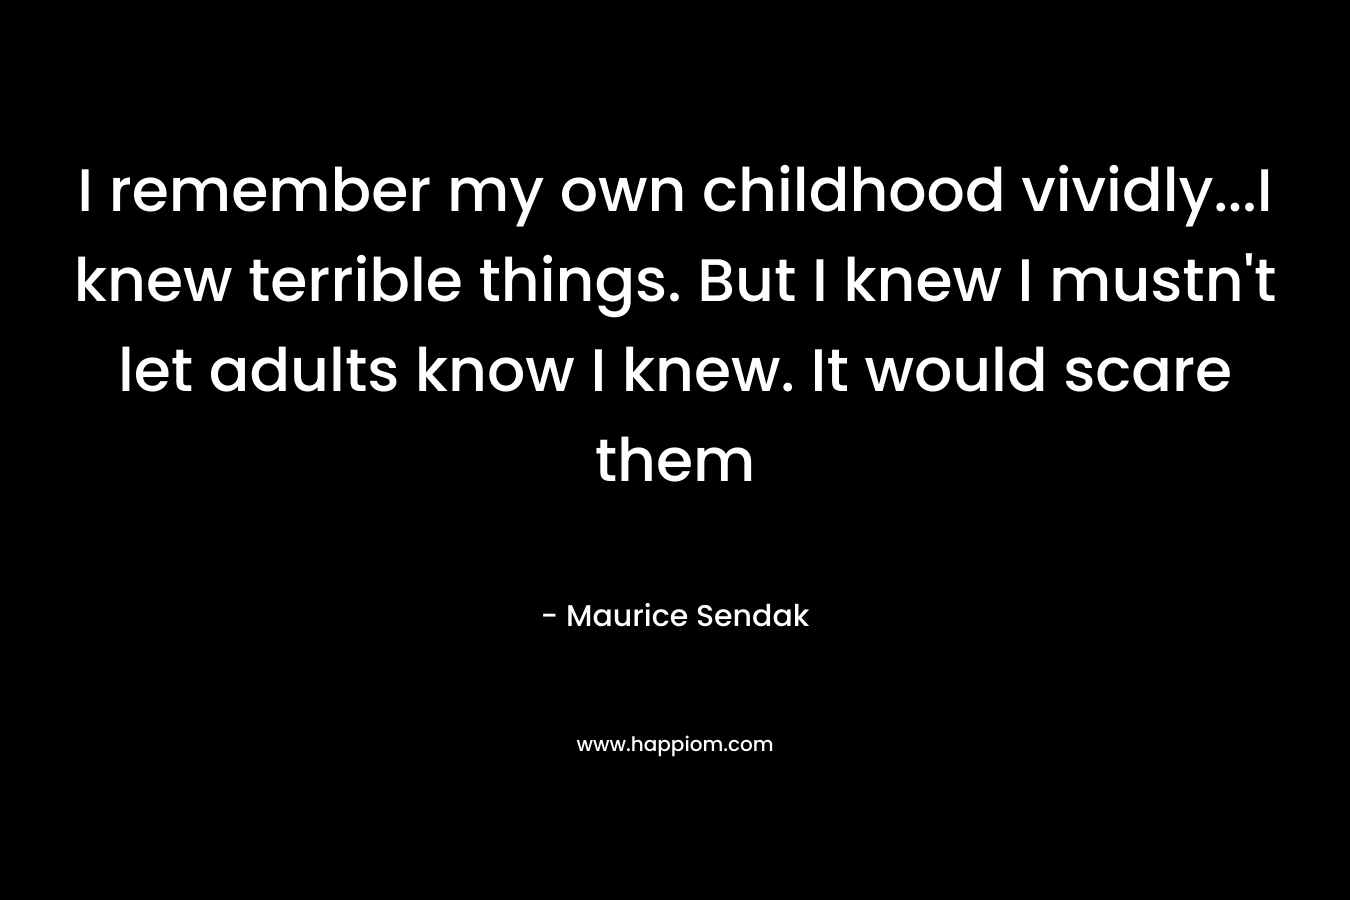 I remember my own childhood vividly...I knew terrible things. But I knew I mustn't let adults know I knew. It would scare them